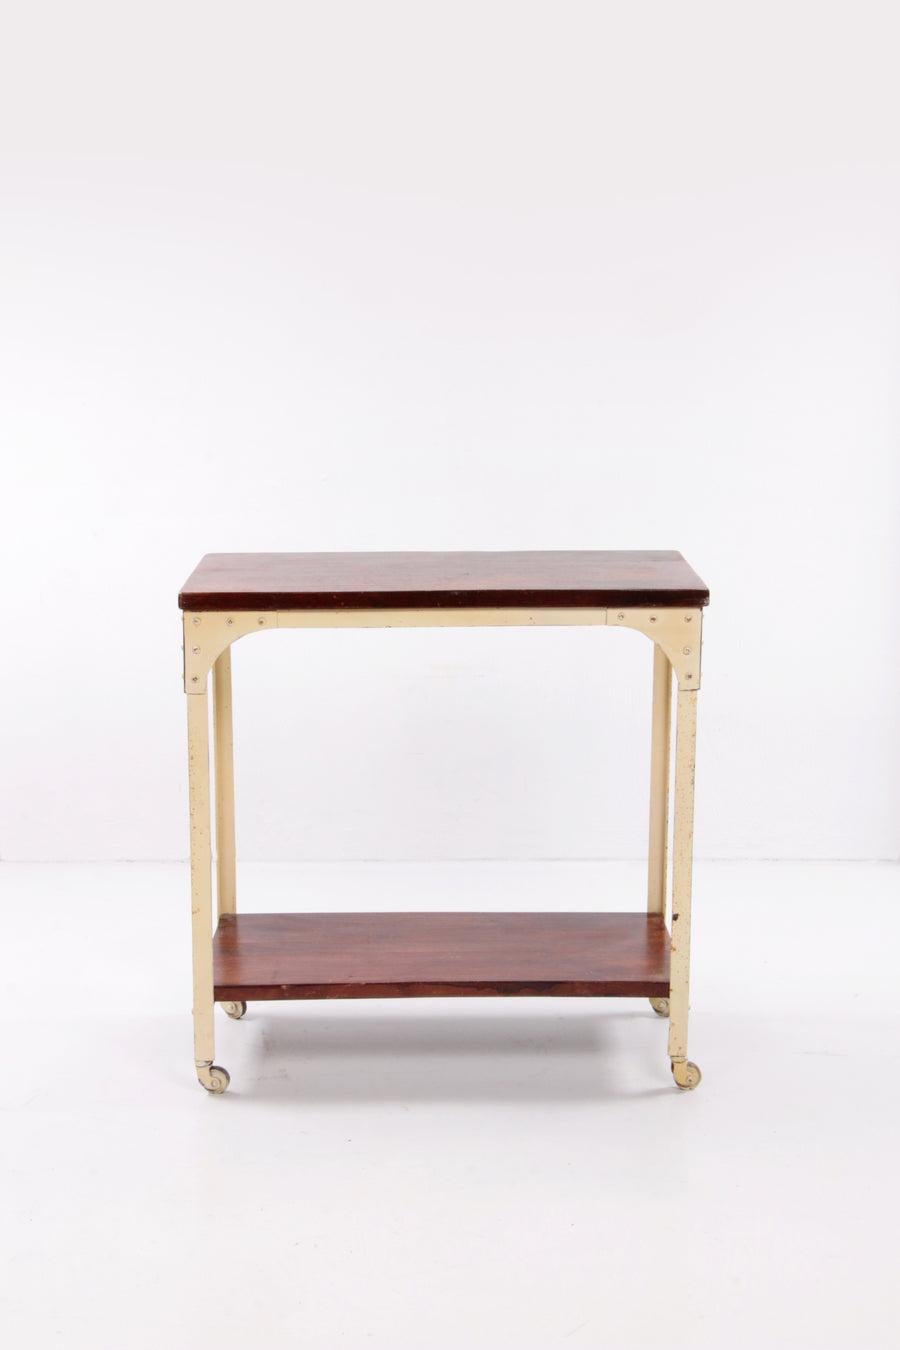 Industrial Robust Side Table Made of Wood and Metal,1970 England

This is a heavy side table or trolley, the frame is made of heavy metal and the two tops are made of wood.

Nice to place in your interior or in a bathroom.

Sustainable: